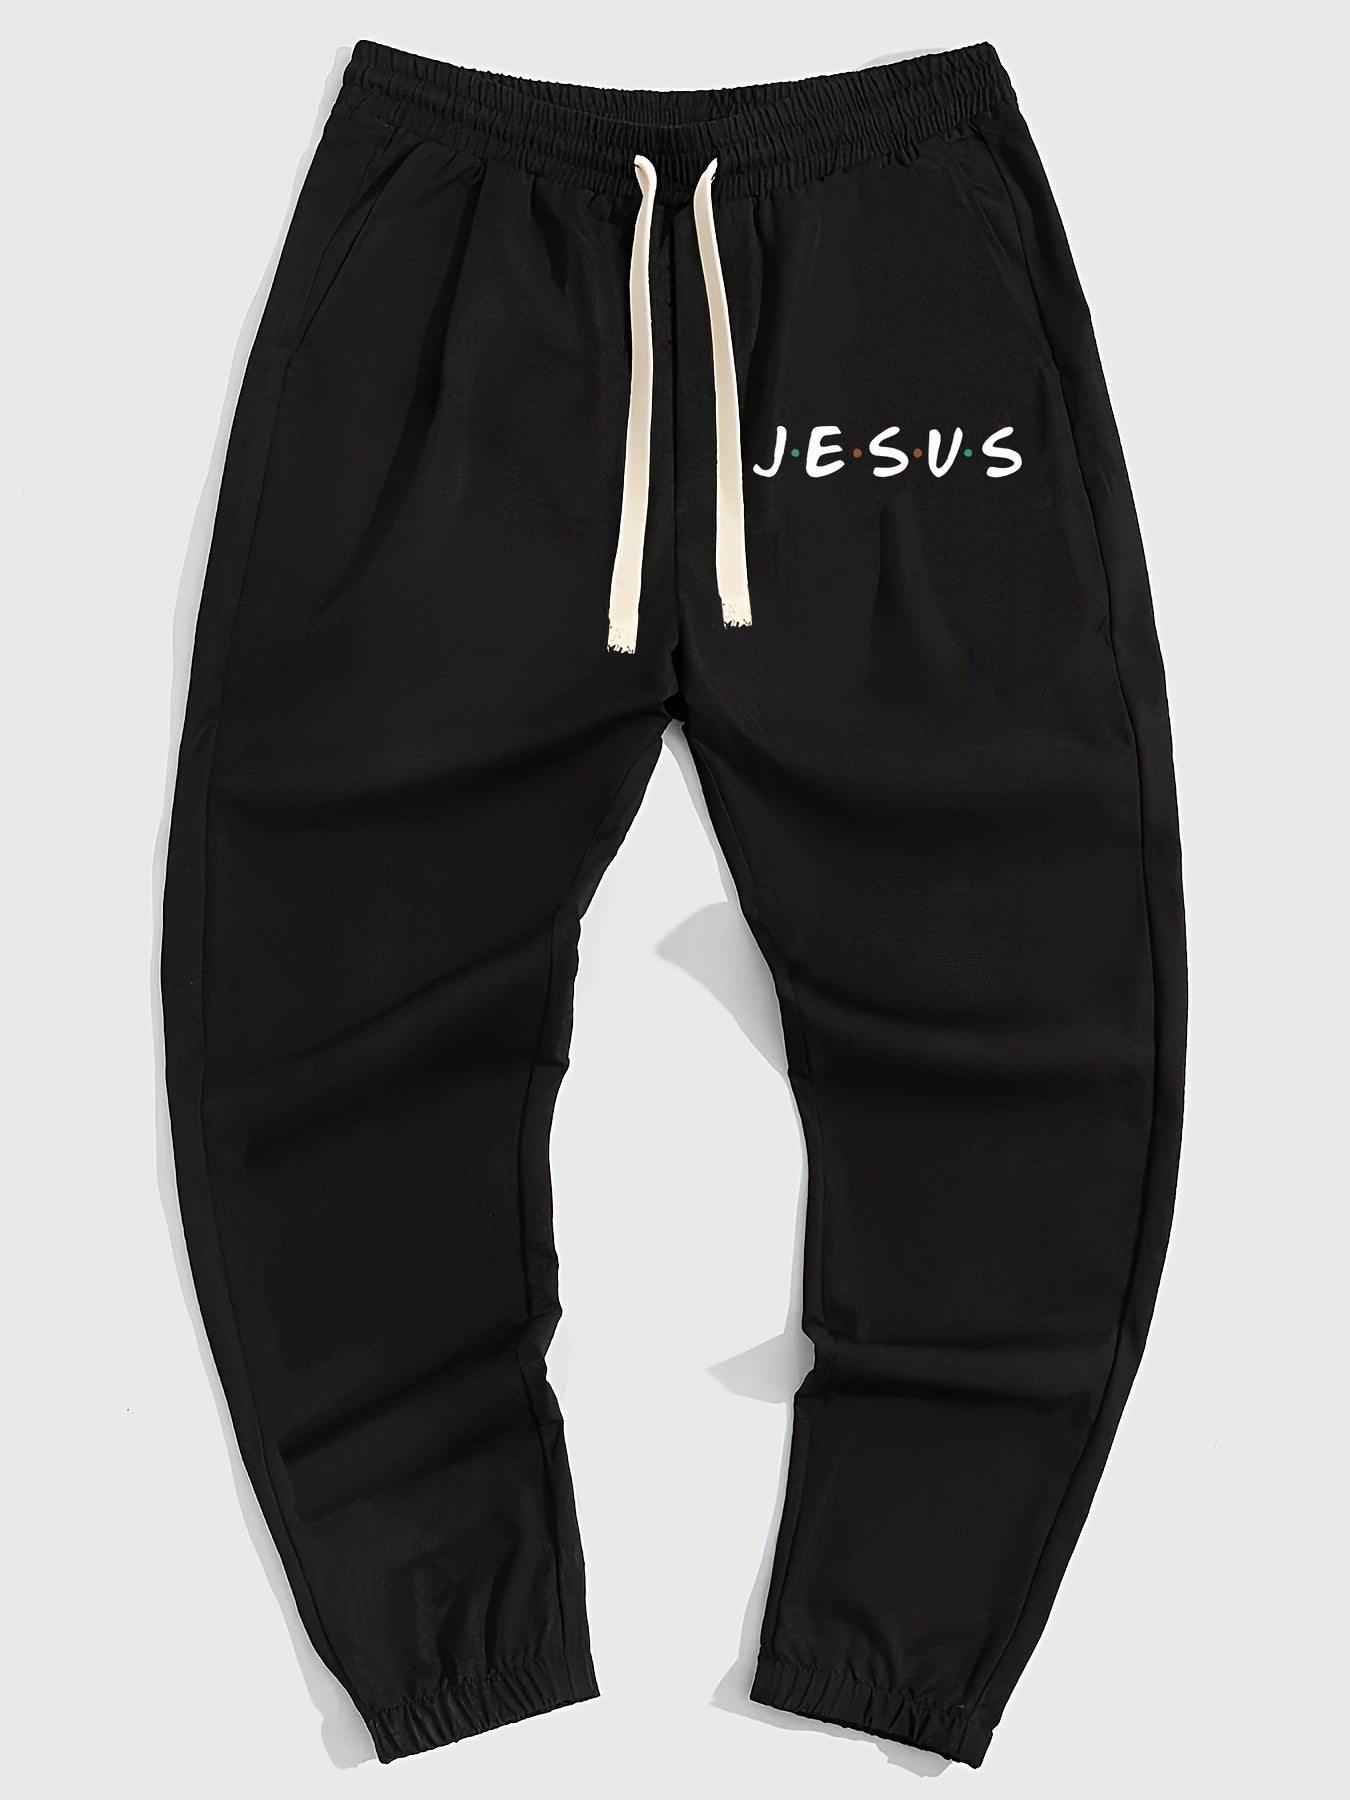 Jesus He'll Be There For You Men's Christian Casual Outfit claimedbygoddesigns